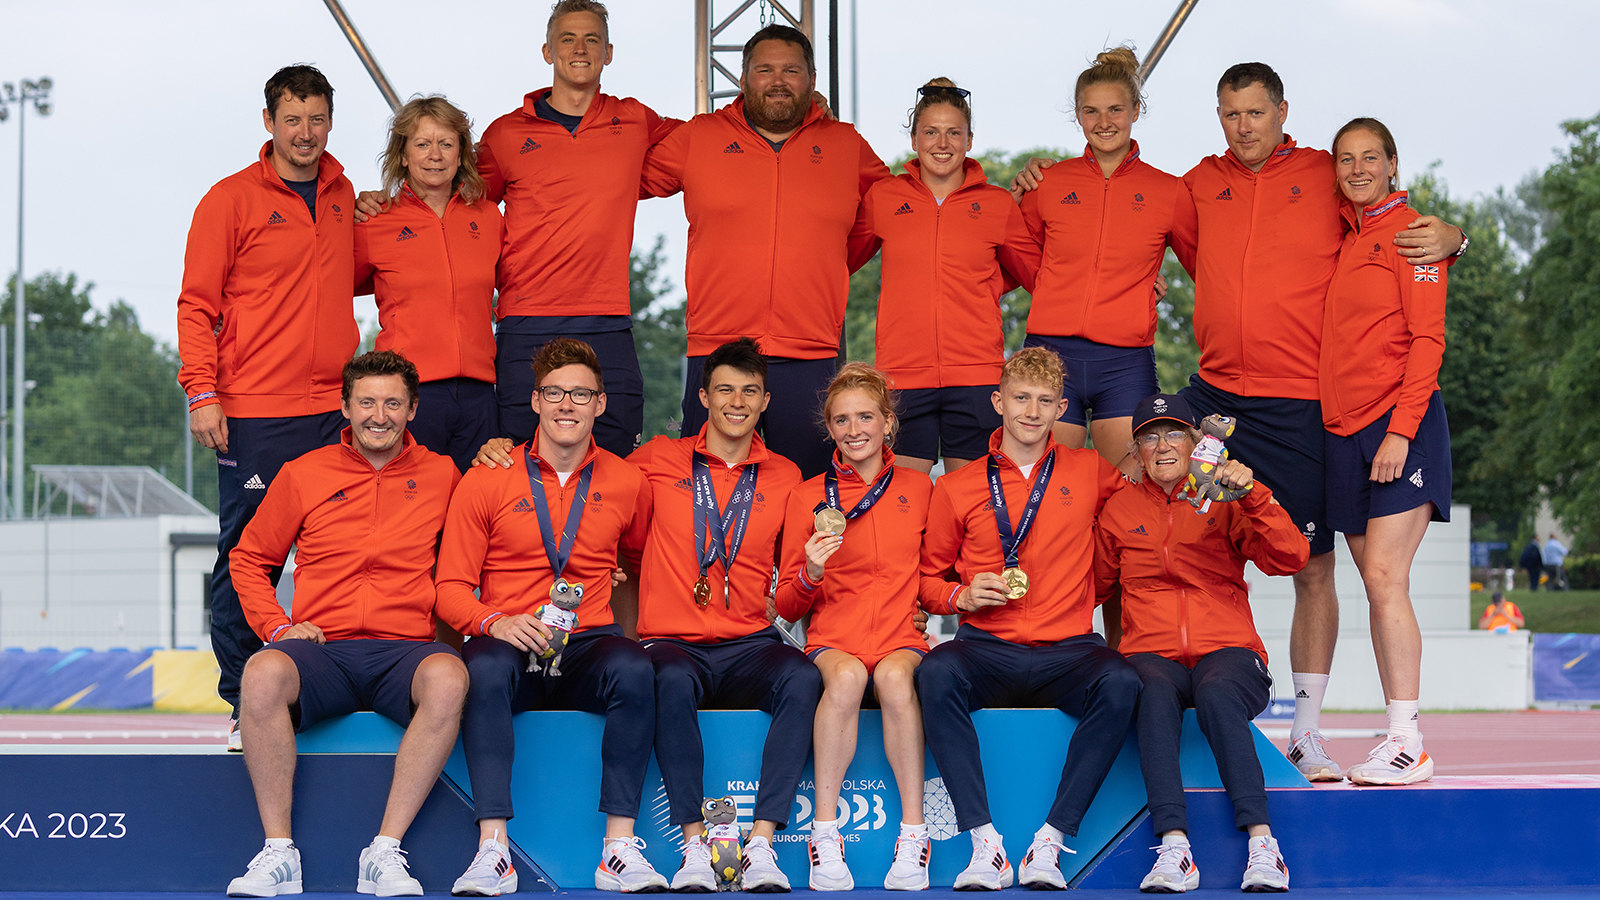 A group picture of the Pentathlon GB athletes, coaches and support staff at the 2023 European Games